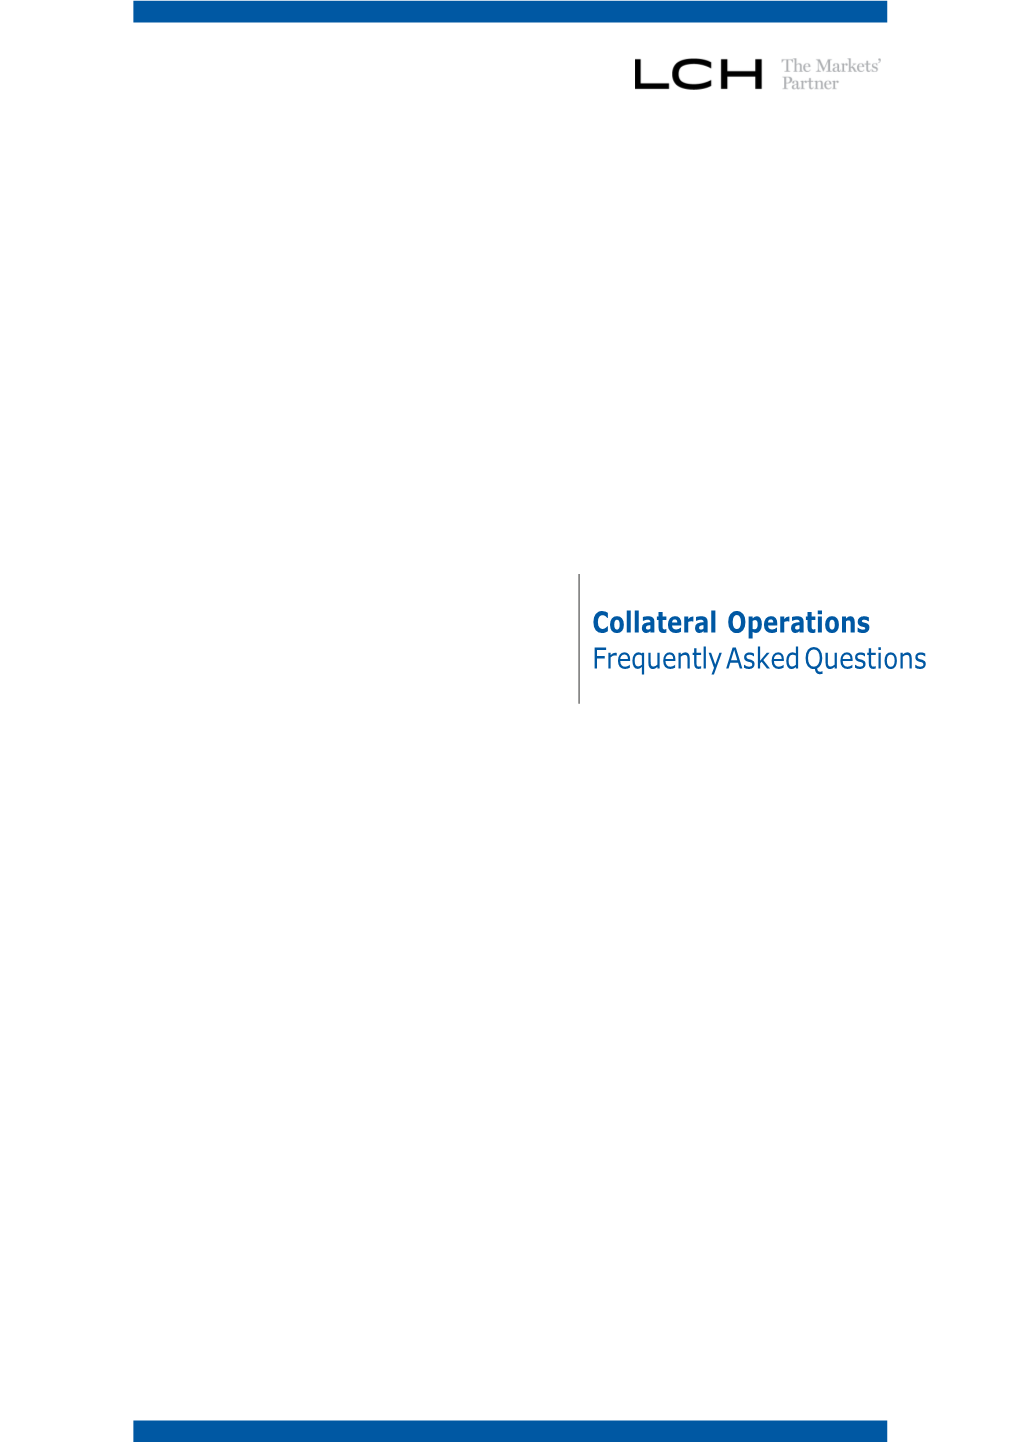 Collateral Operations Frequently Asked Questions